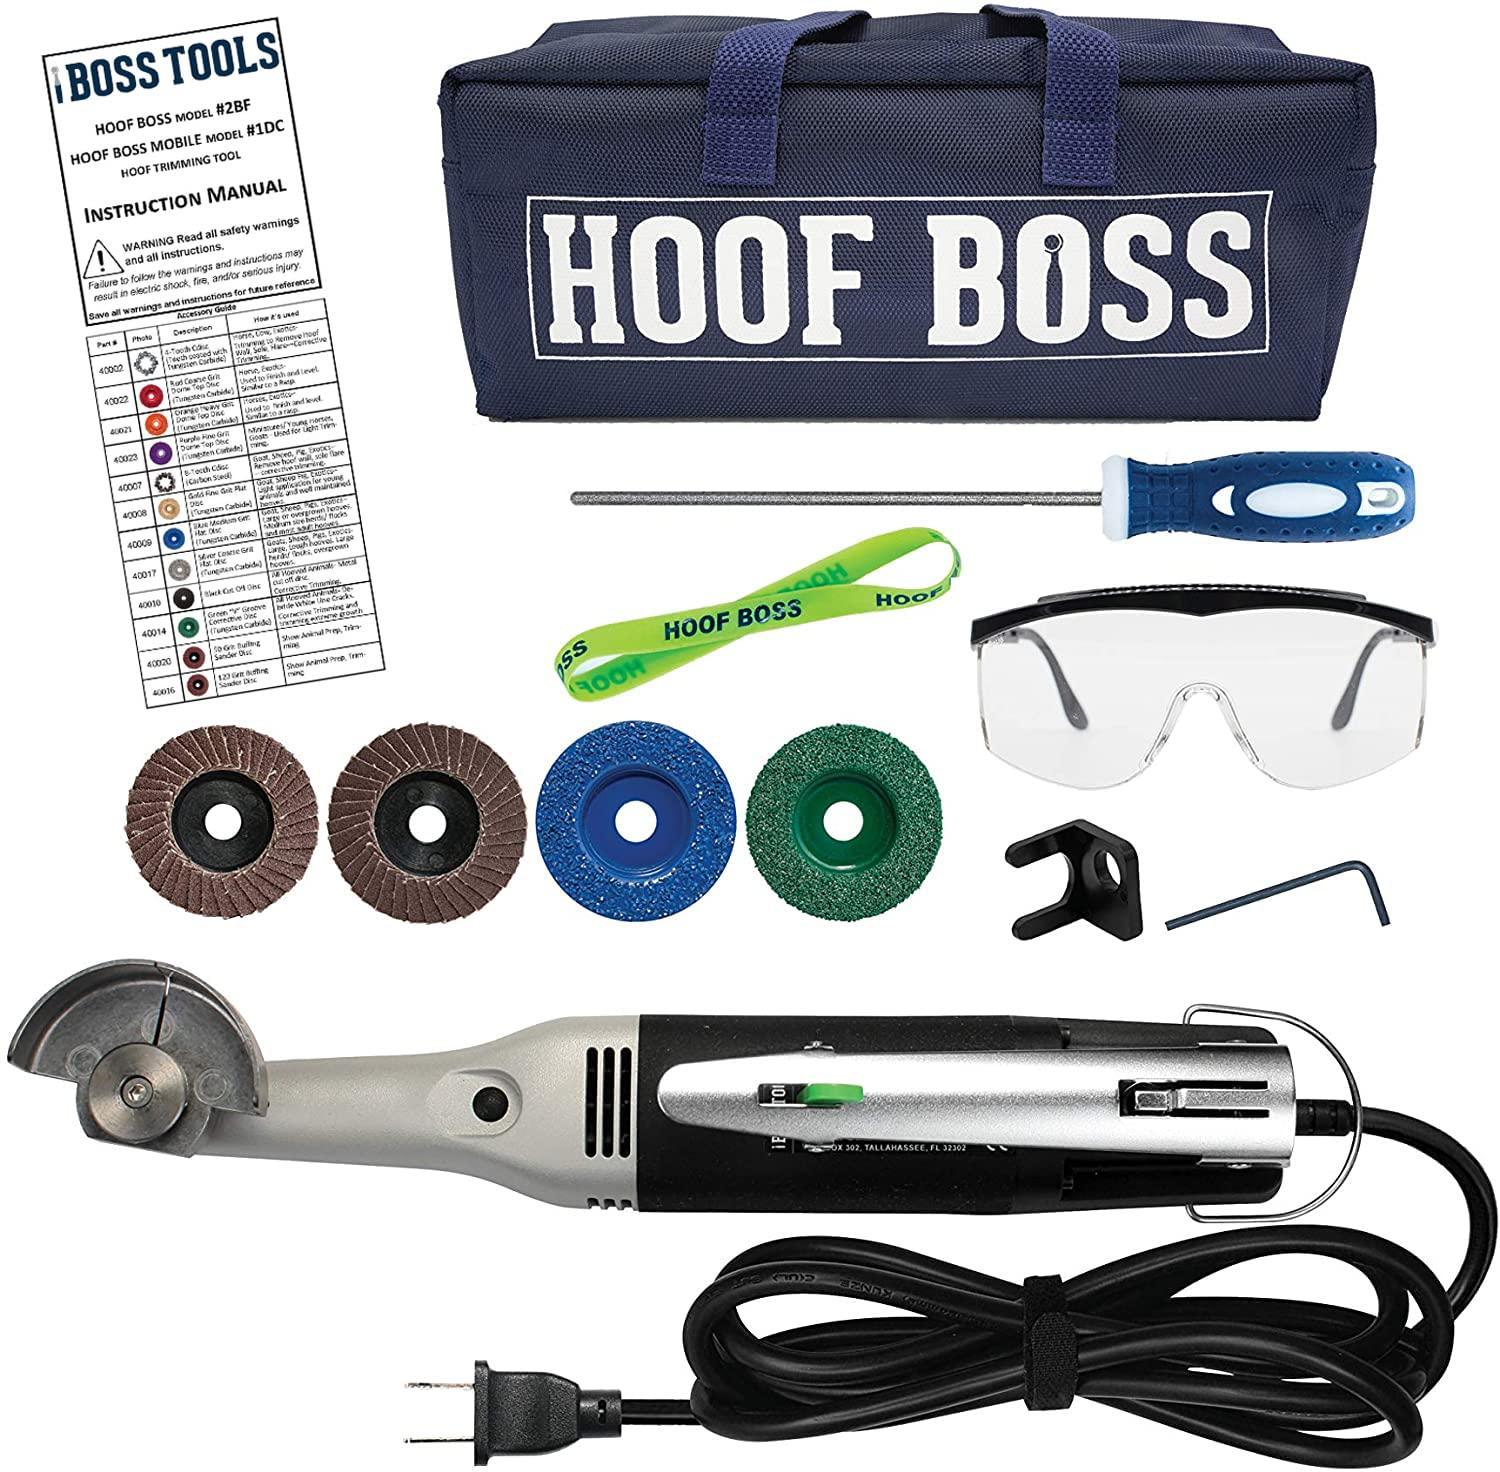 Basic Pig Hoof Trimmer Set - Electric Plug in - 110 Volt - Accessories Included